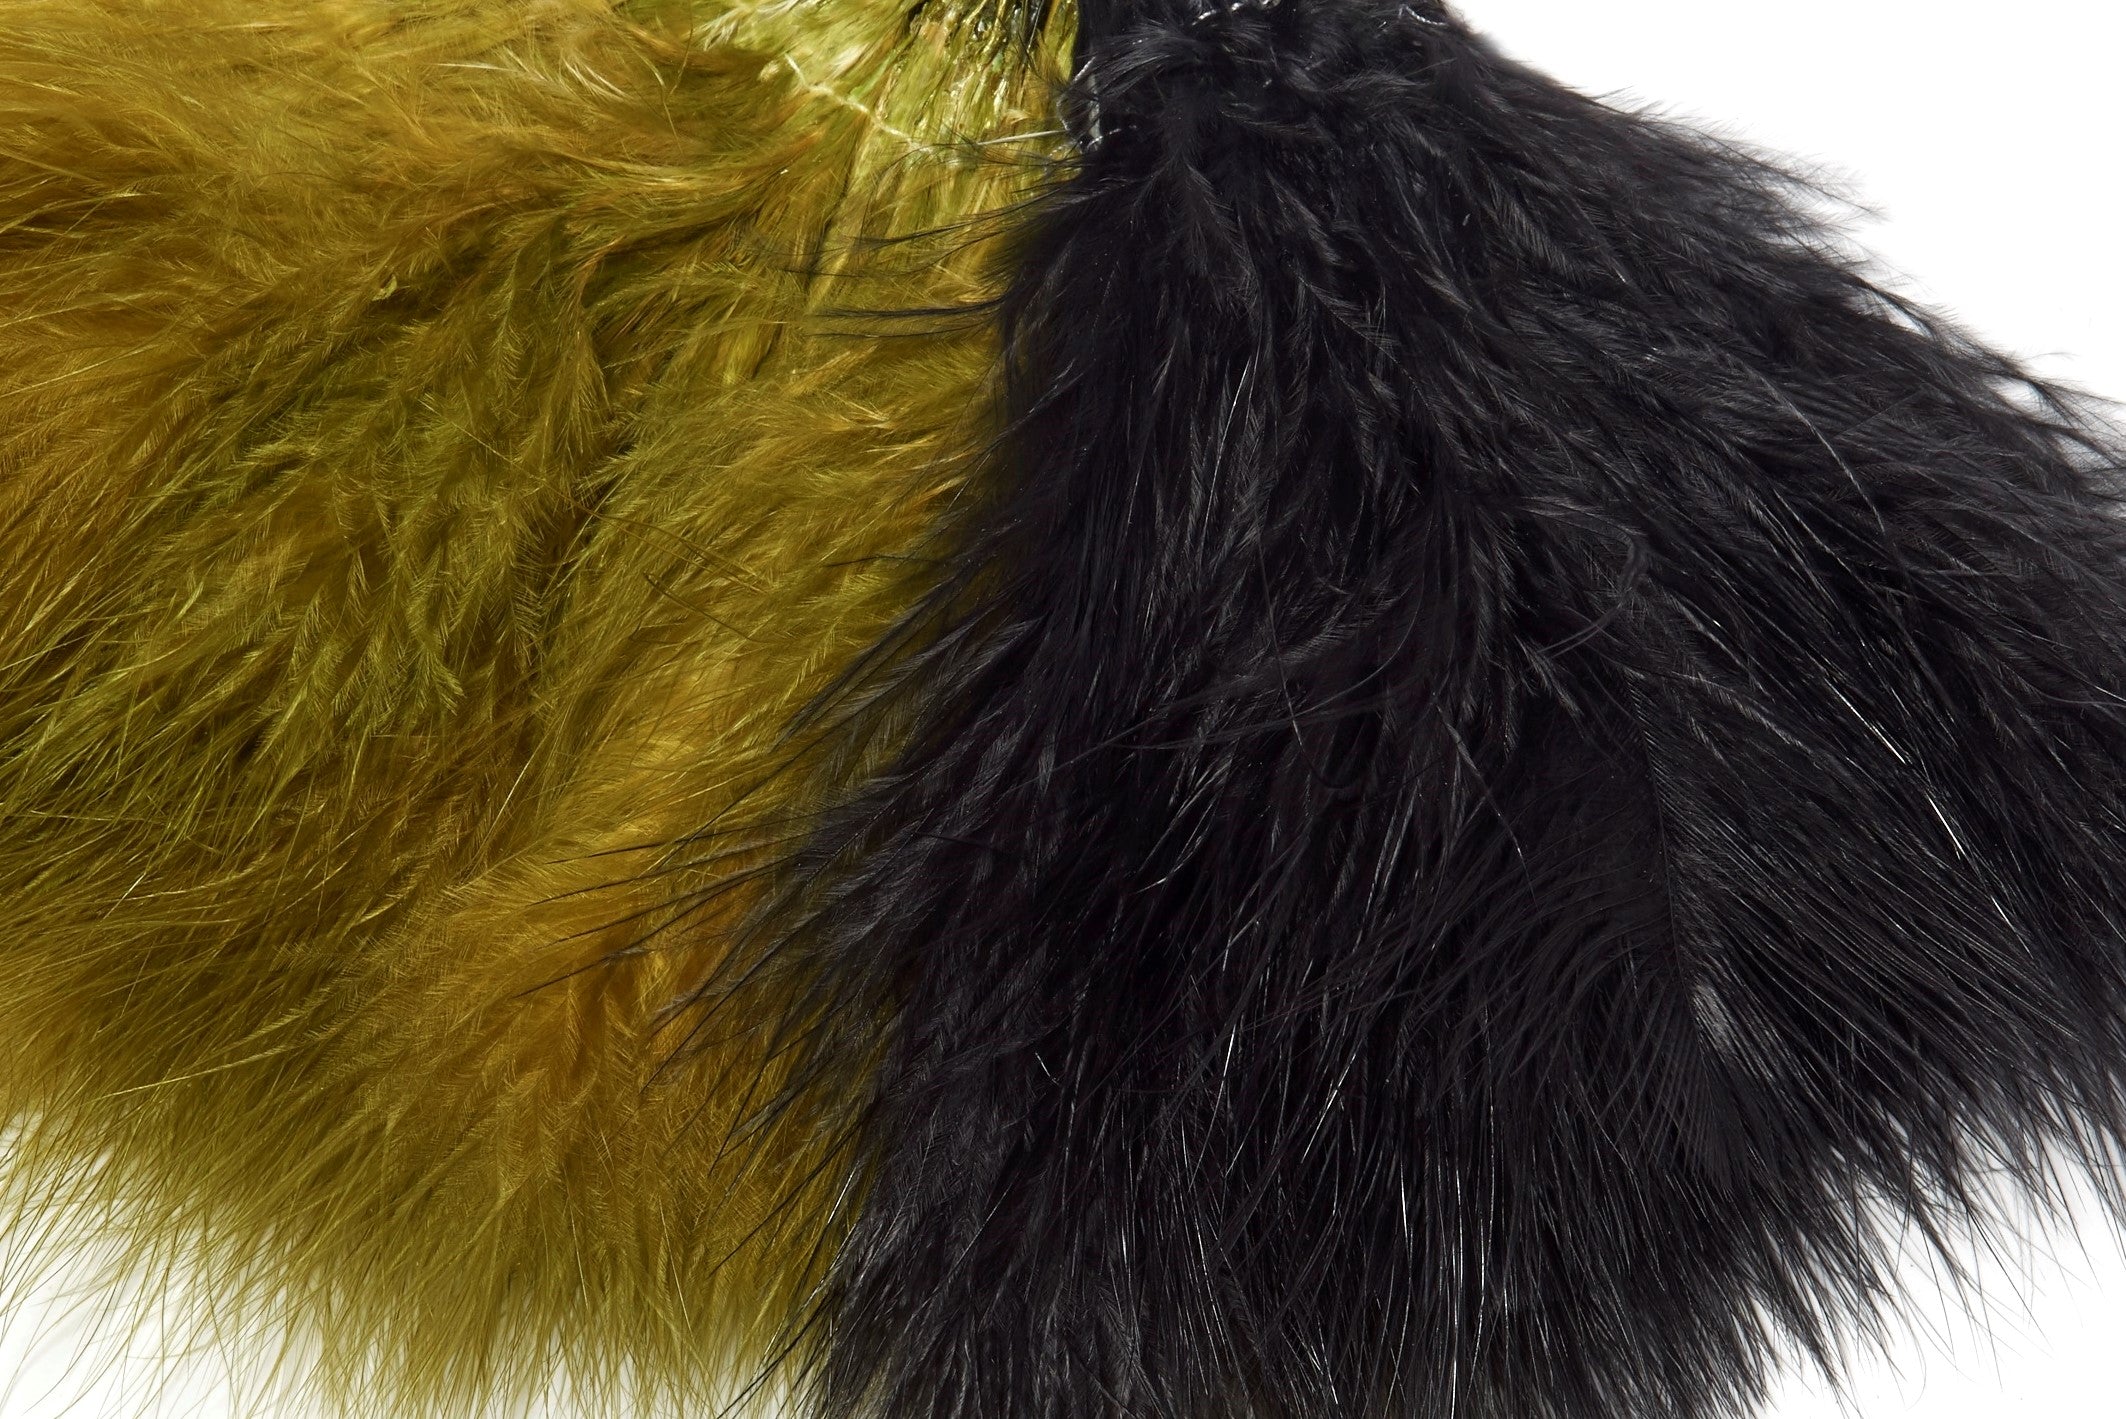 BLACK Strung Marabou Turkey Feathers for Fly Fishing, Fly Tying, D.I.Y Arts  and Crafts ZUCKER® 